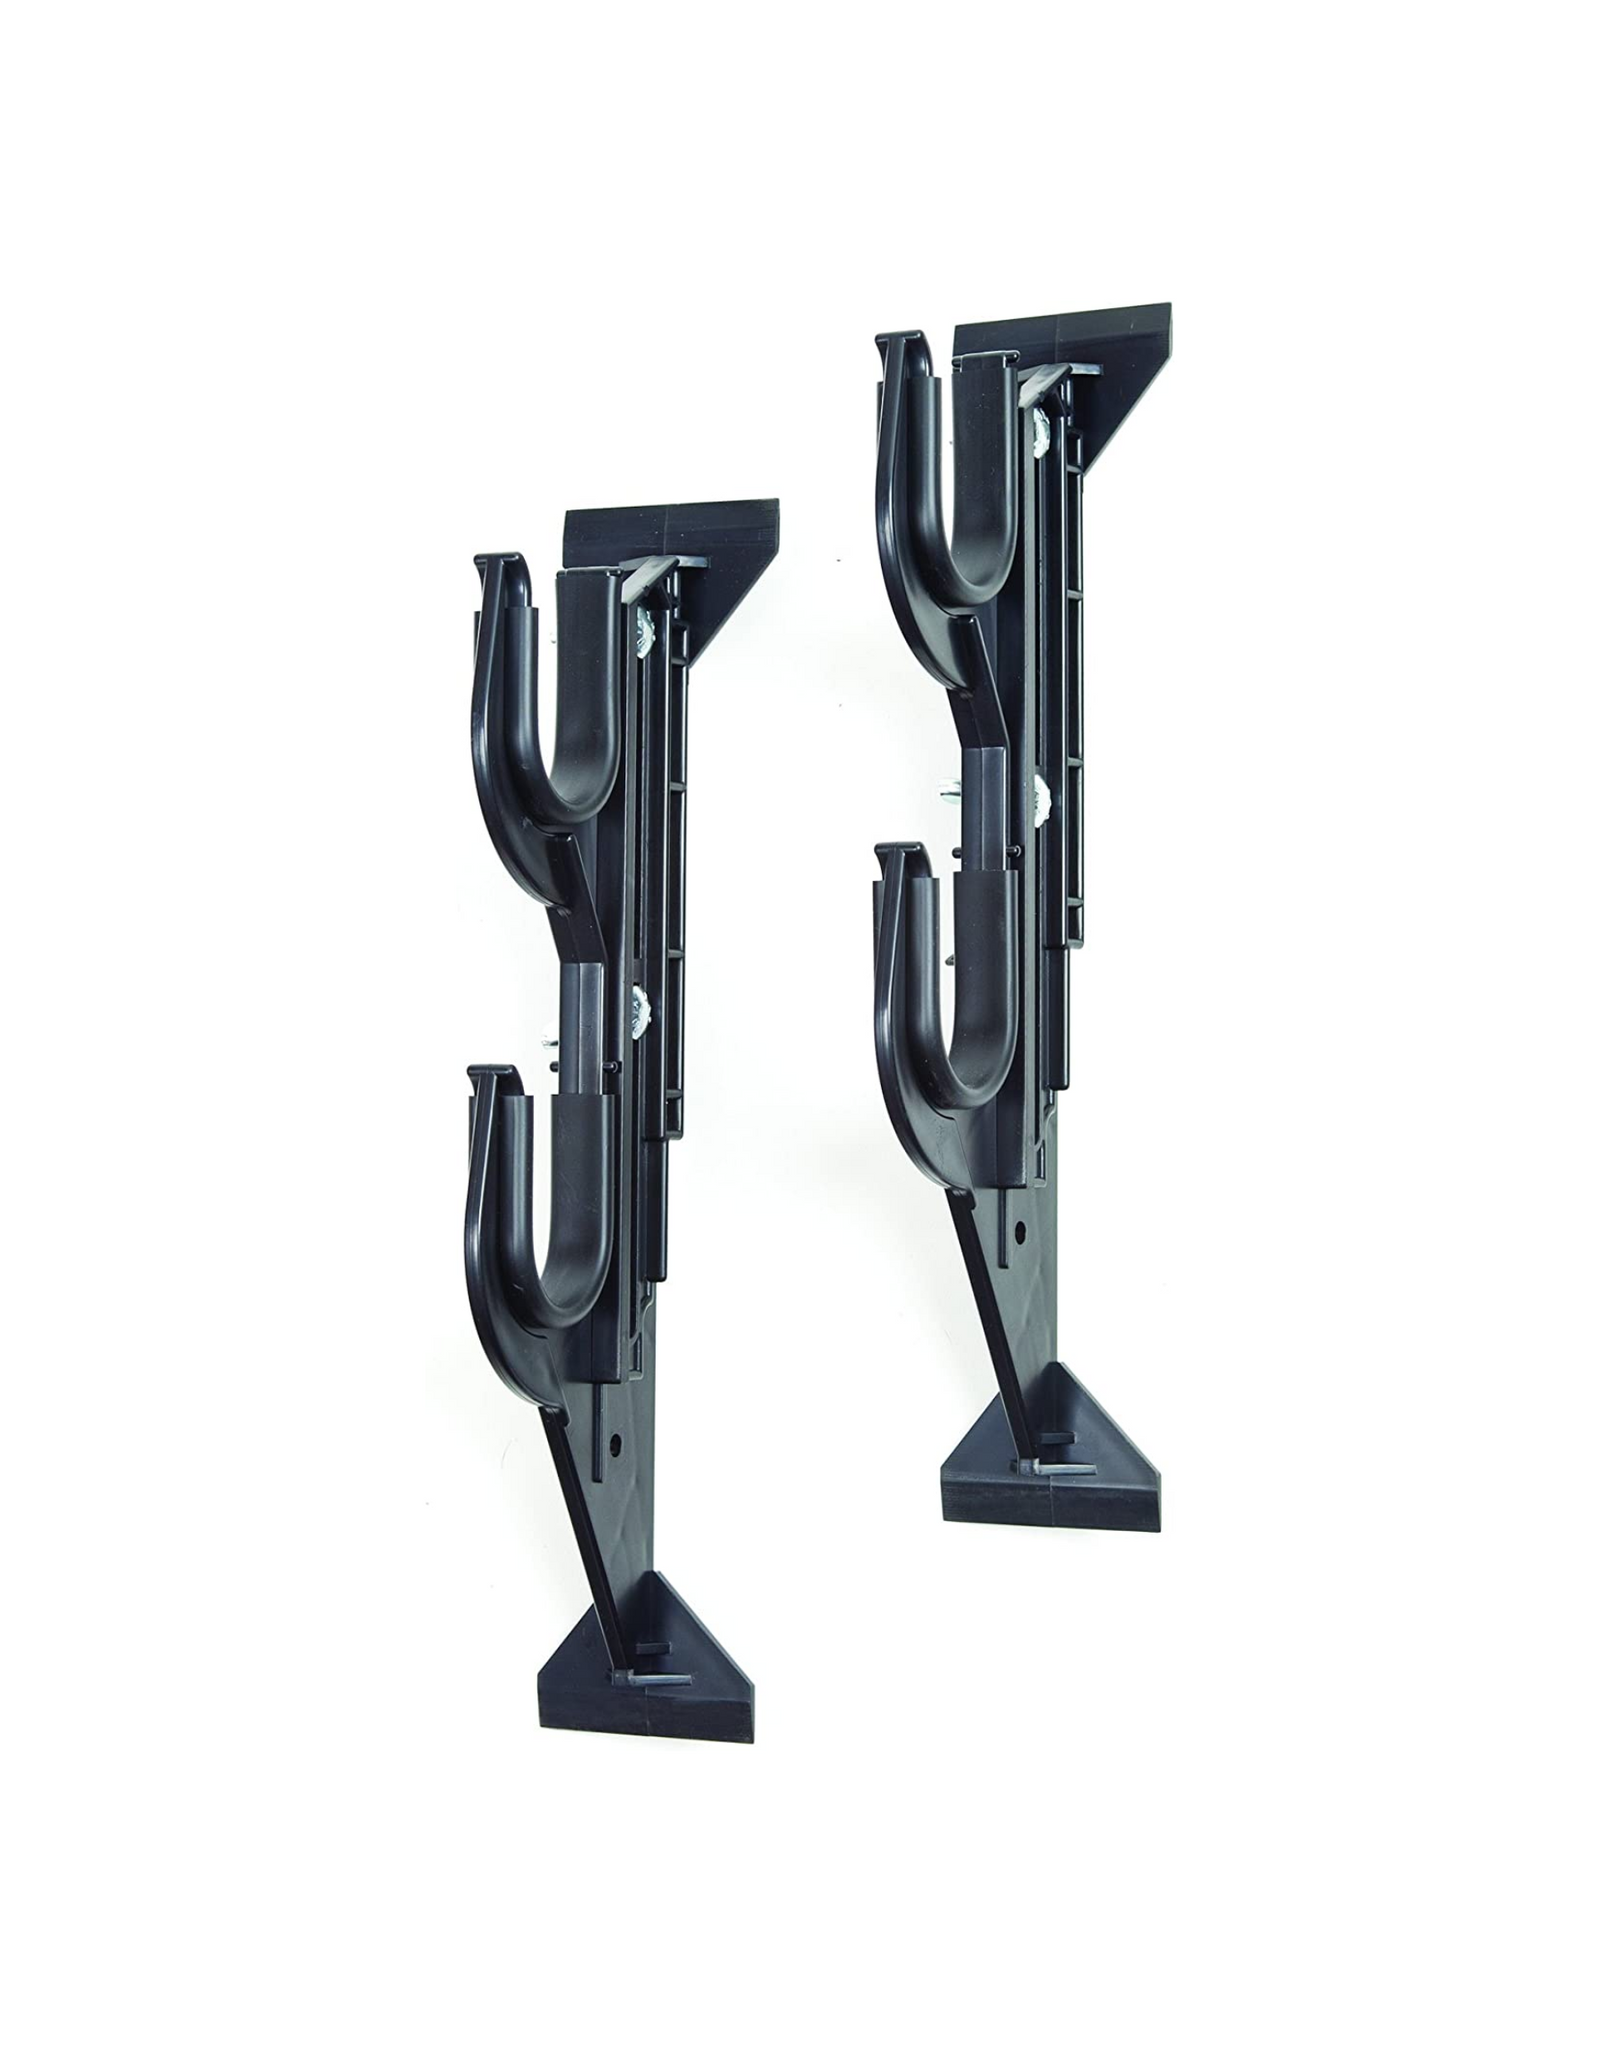 Allen Company Molded Truck Gun Rack for Rear Window 17450 - Holds Two Shotguns, Rifles, Bows, or Tools